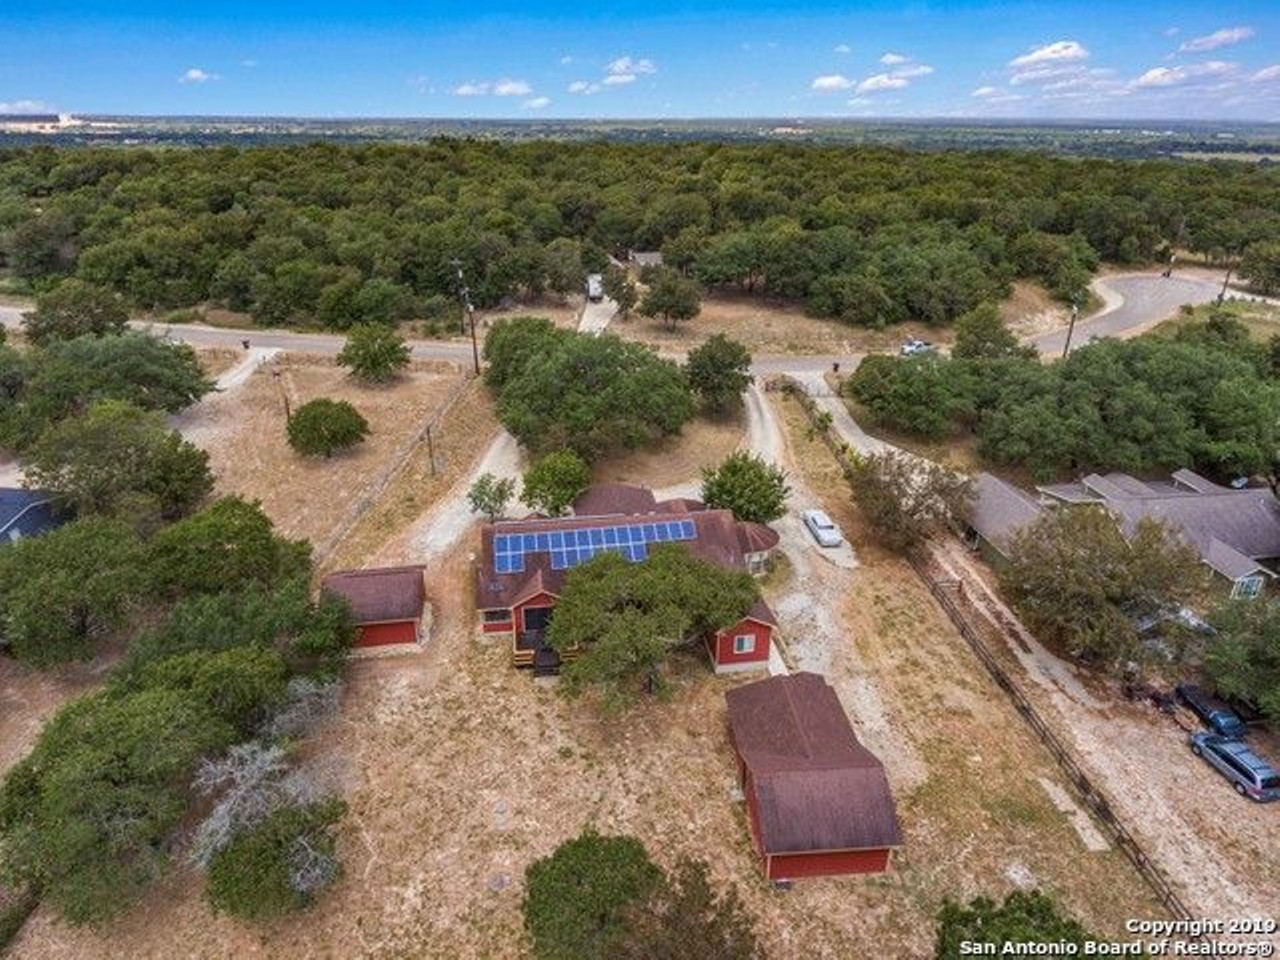 This Southside San Antonio Home for Sale Is a Solar-Powered Nature Lover's Hideaway